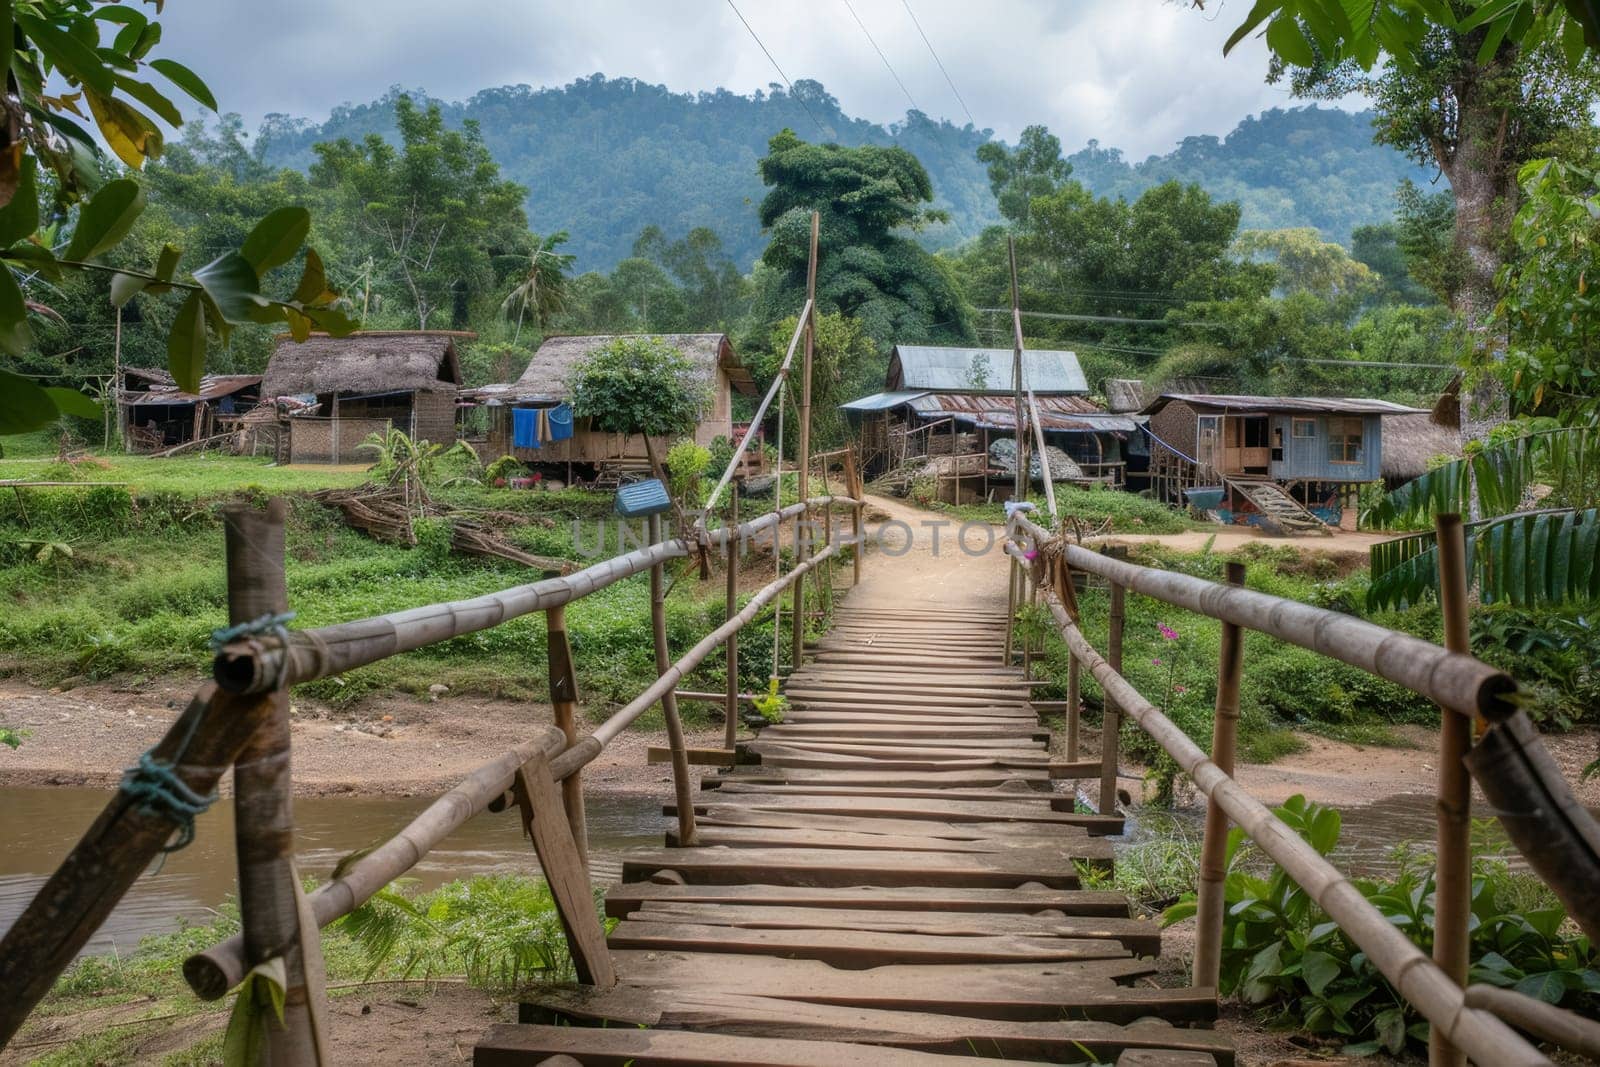 A serene view of a rural wooden bridge connecting village houses, surrounded by lush greenery and a calm river under a cloudy sky.